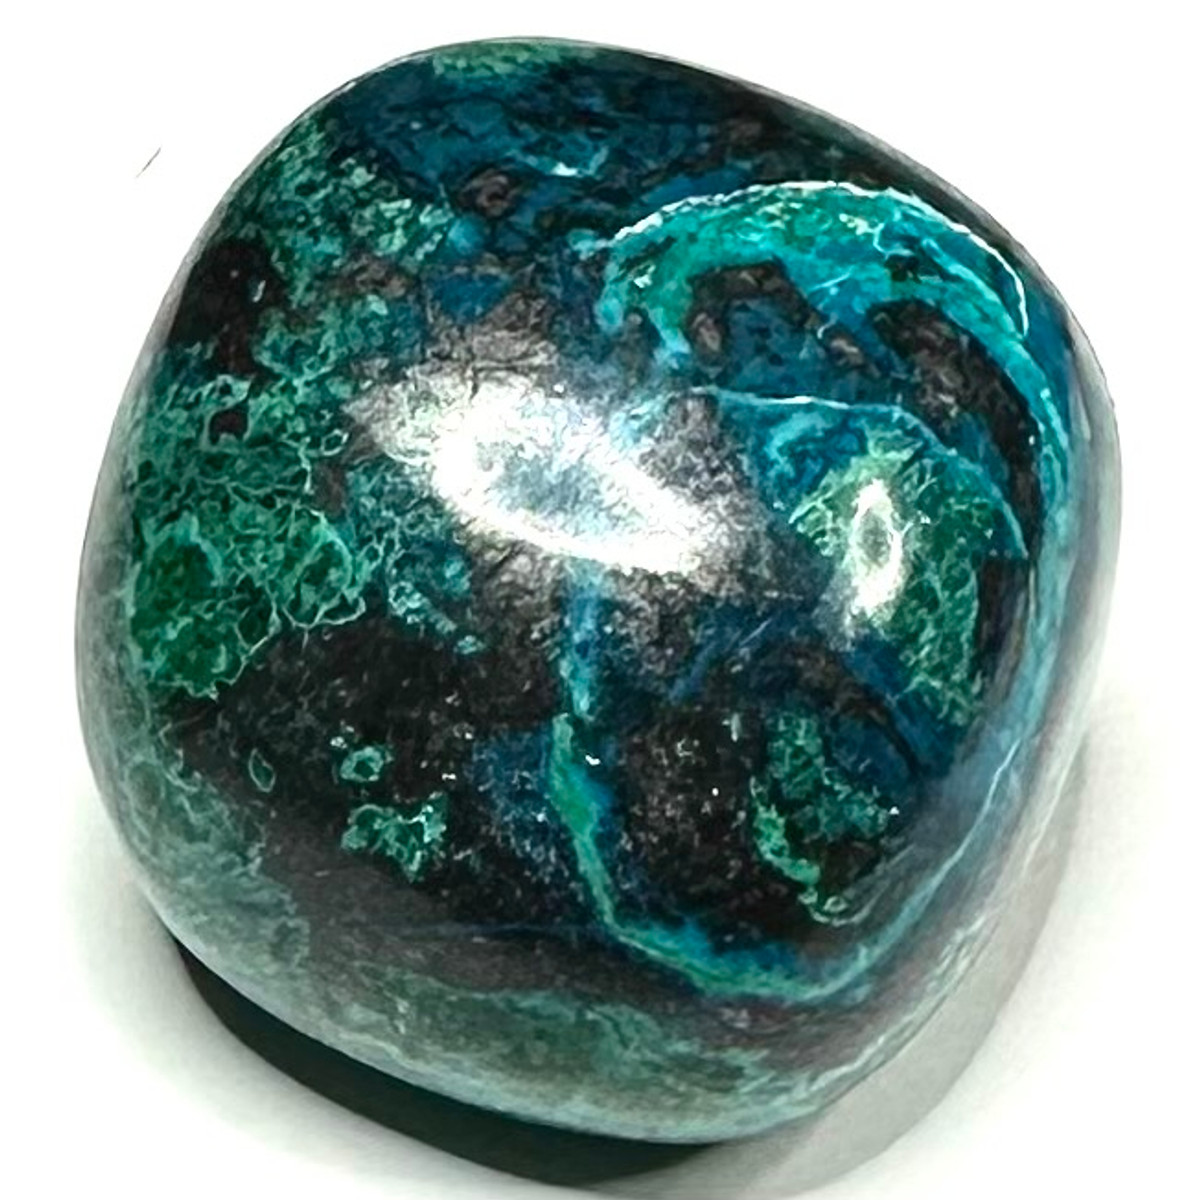 One of a Kind Chrysocolla Gallet Stone-1 x 1"